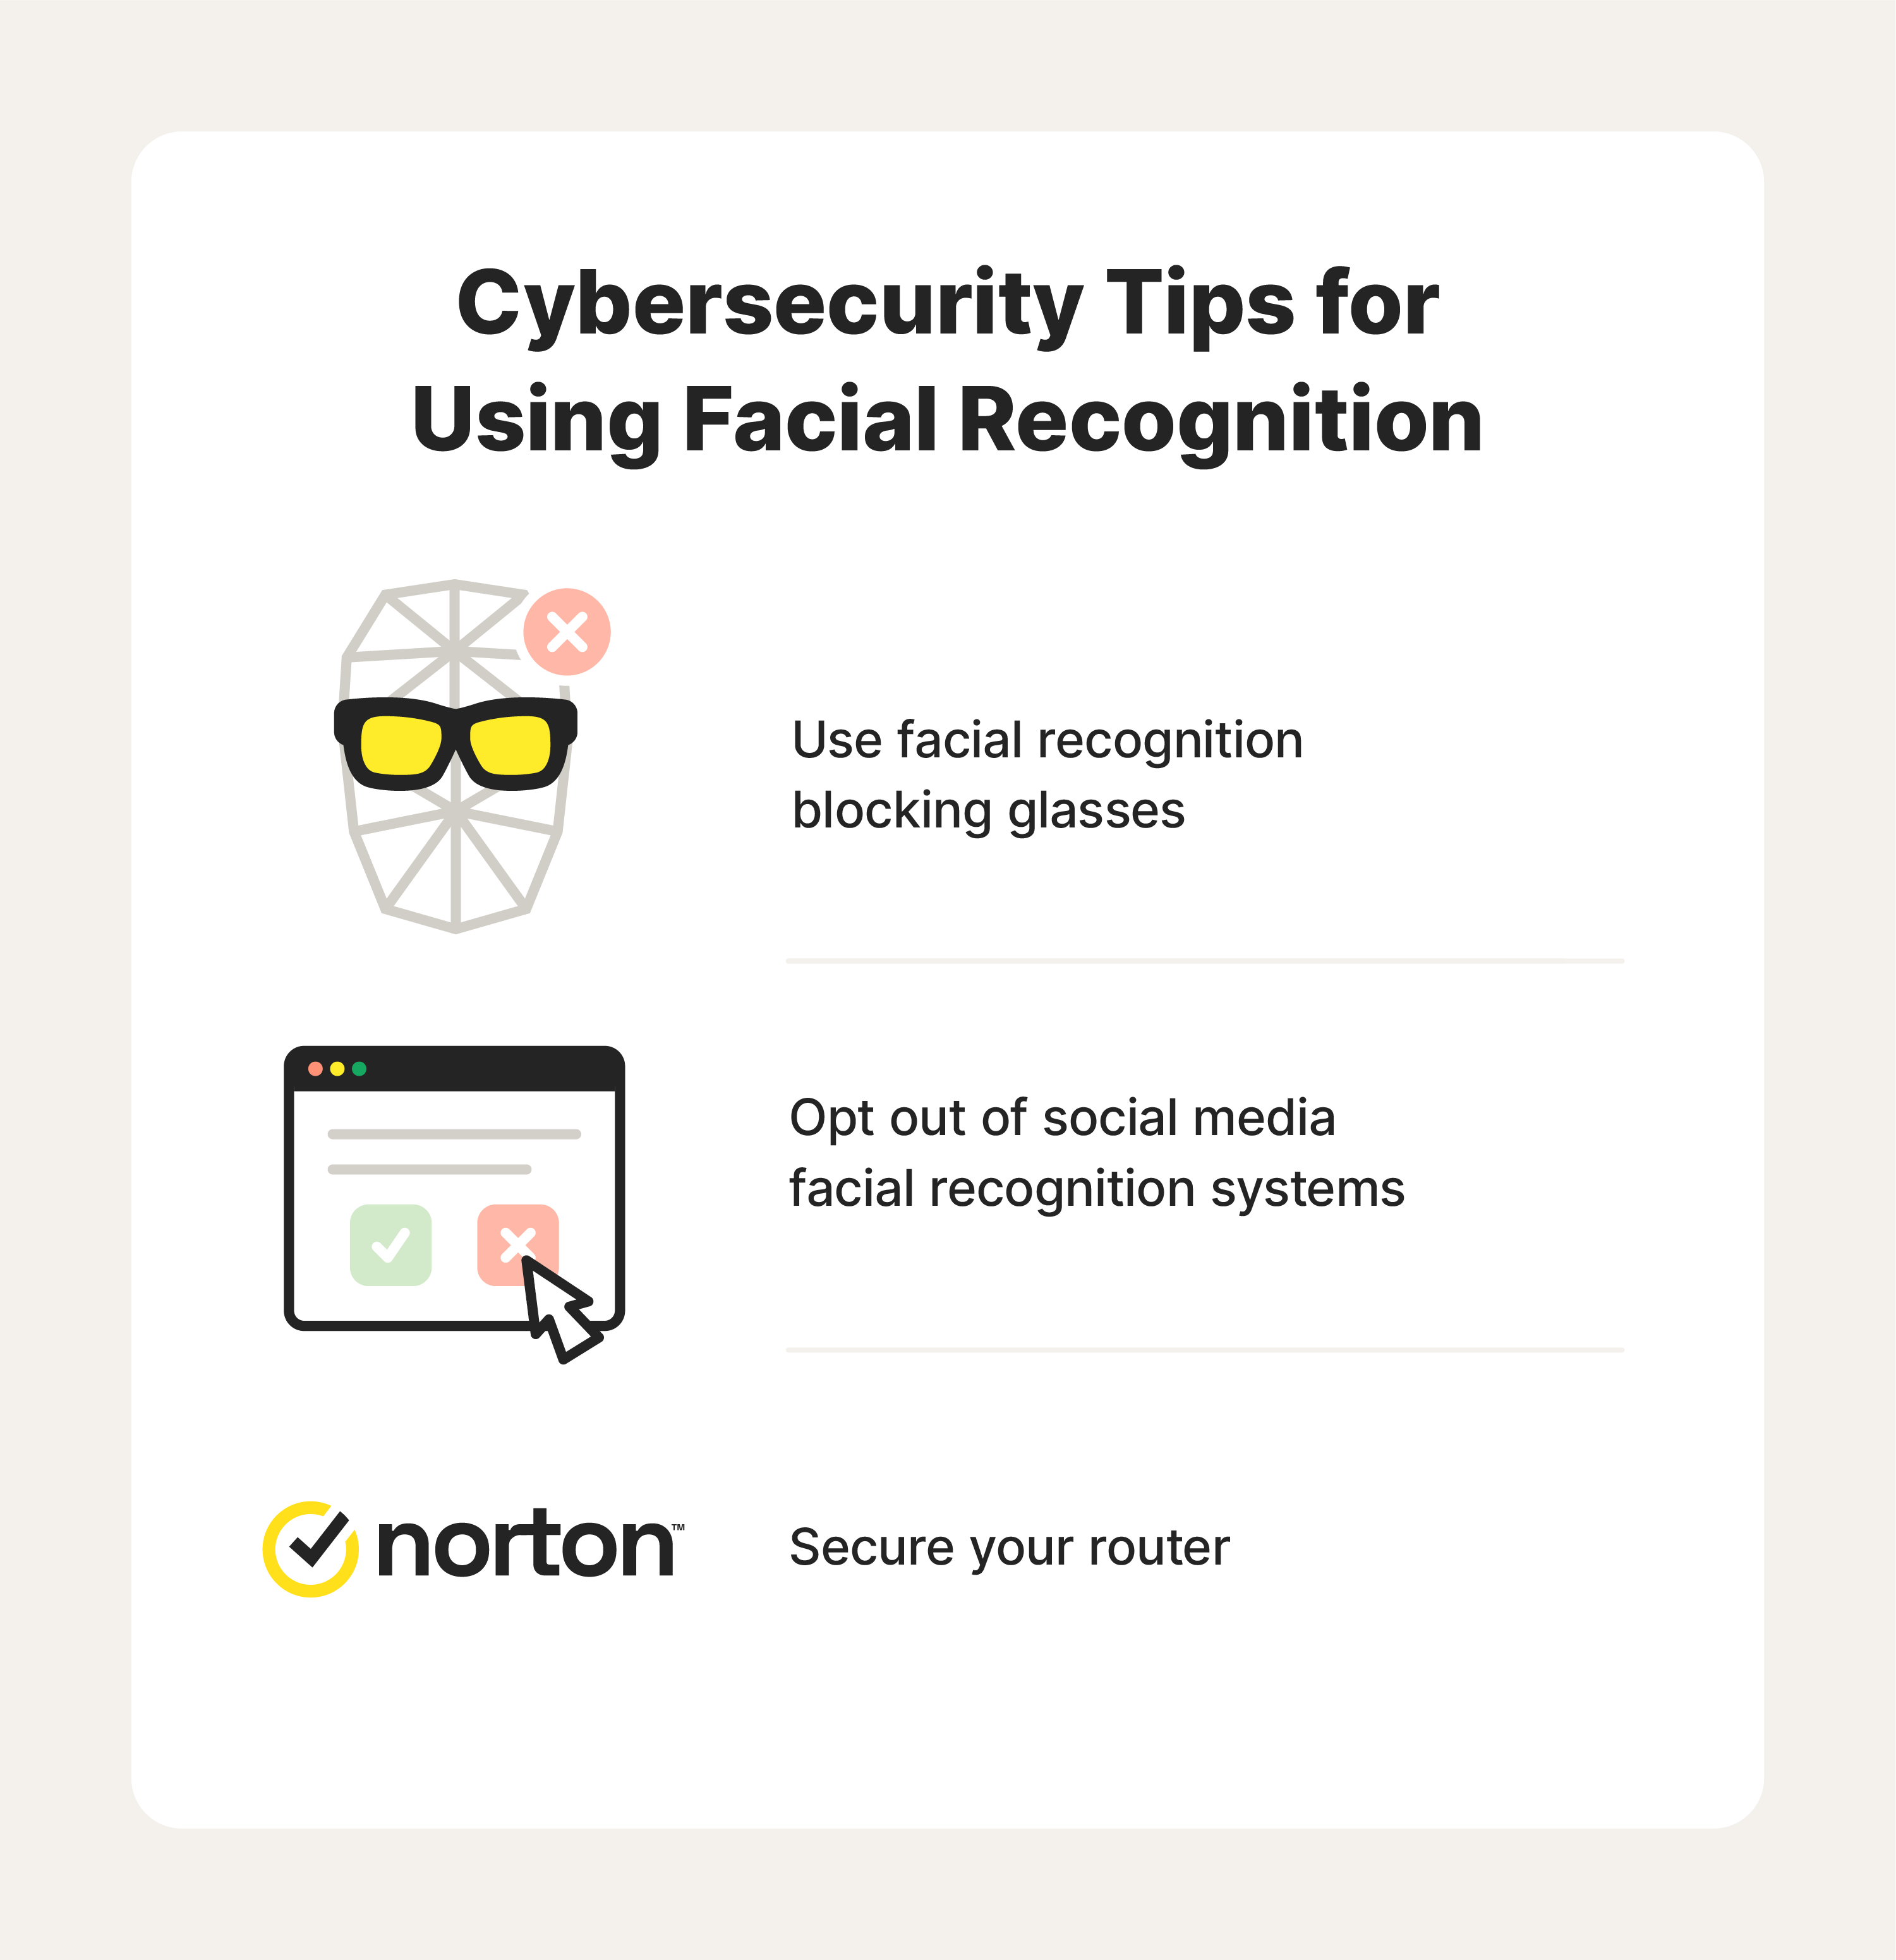 Image recounts steps you can take to protect yourself from being recognized by facial recognition technology.